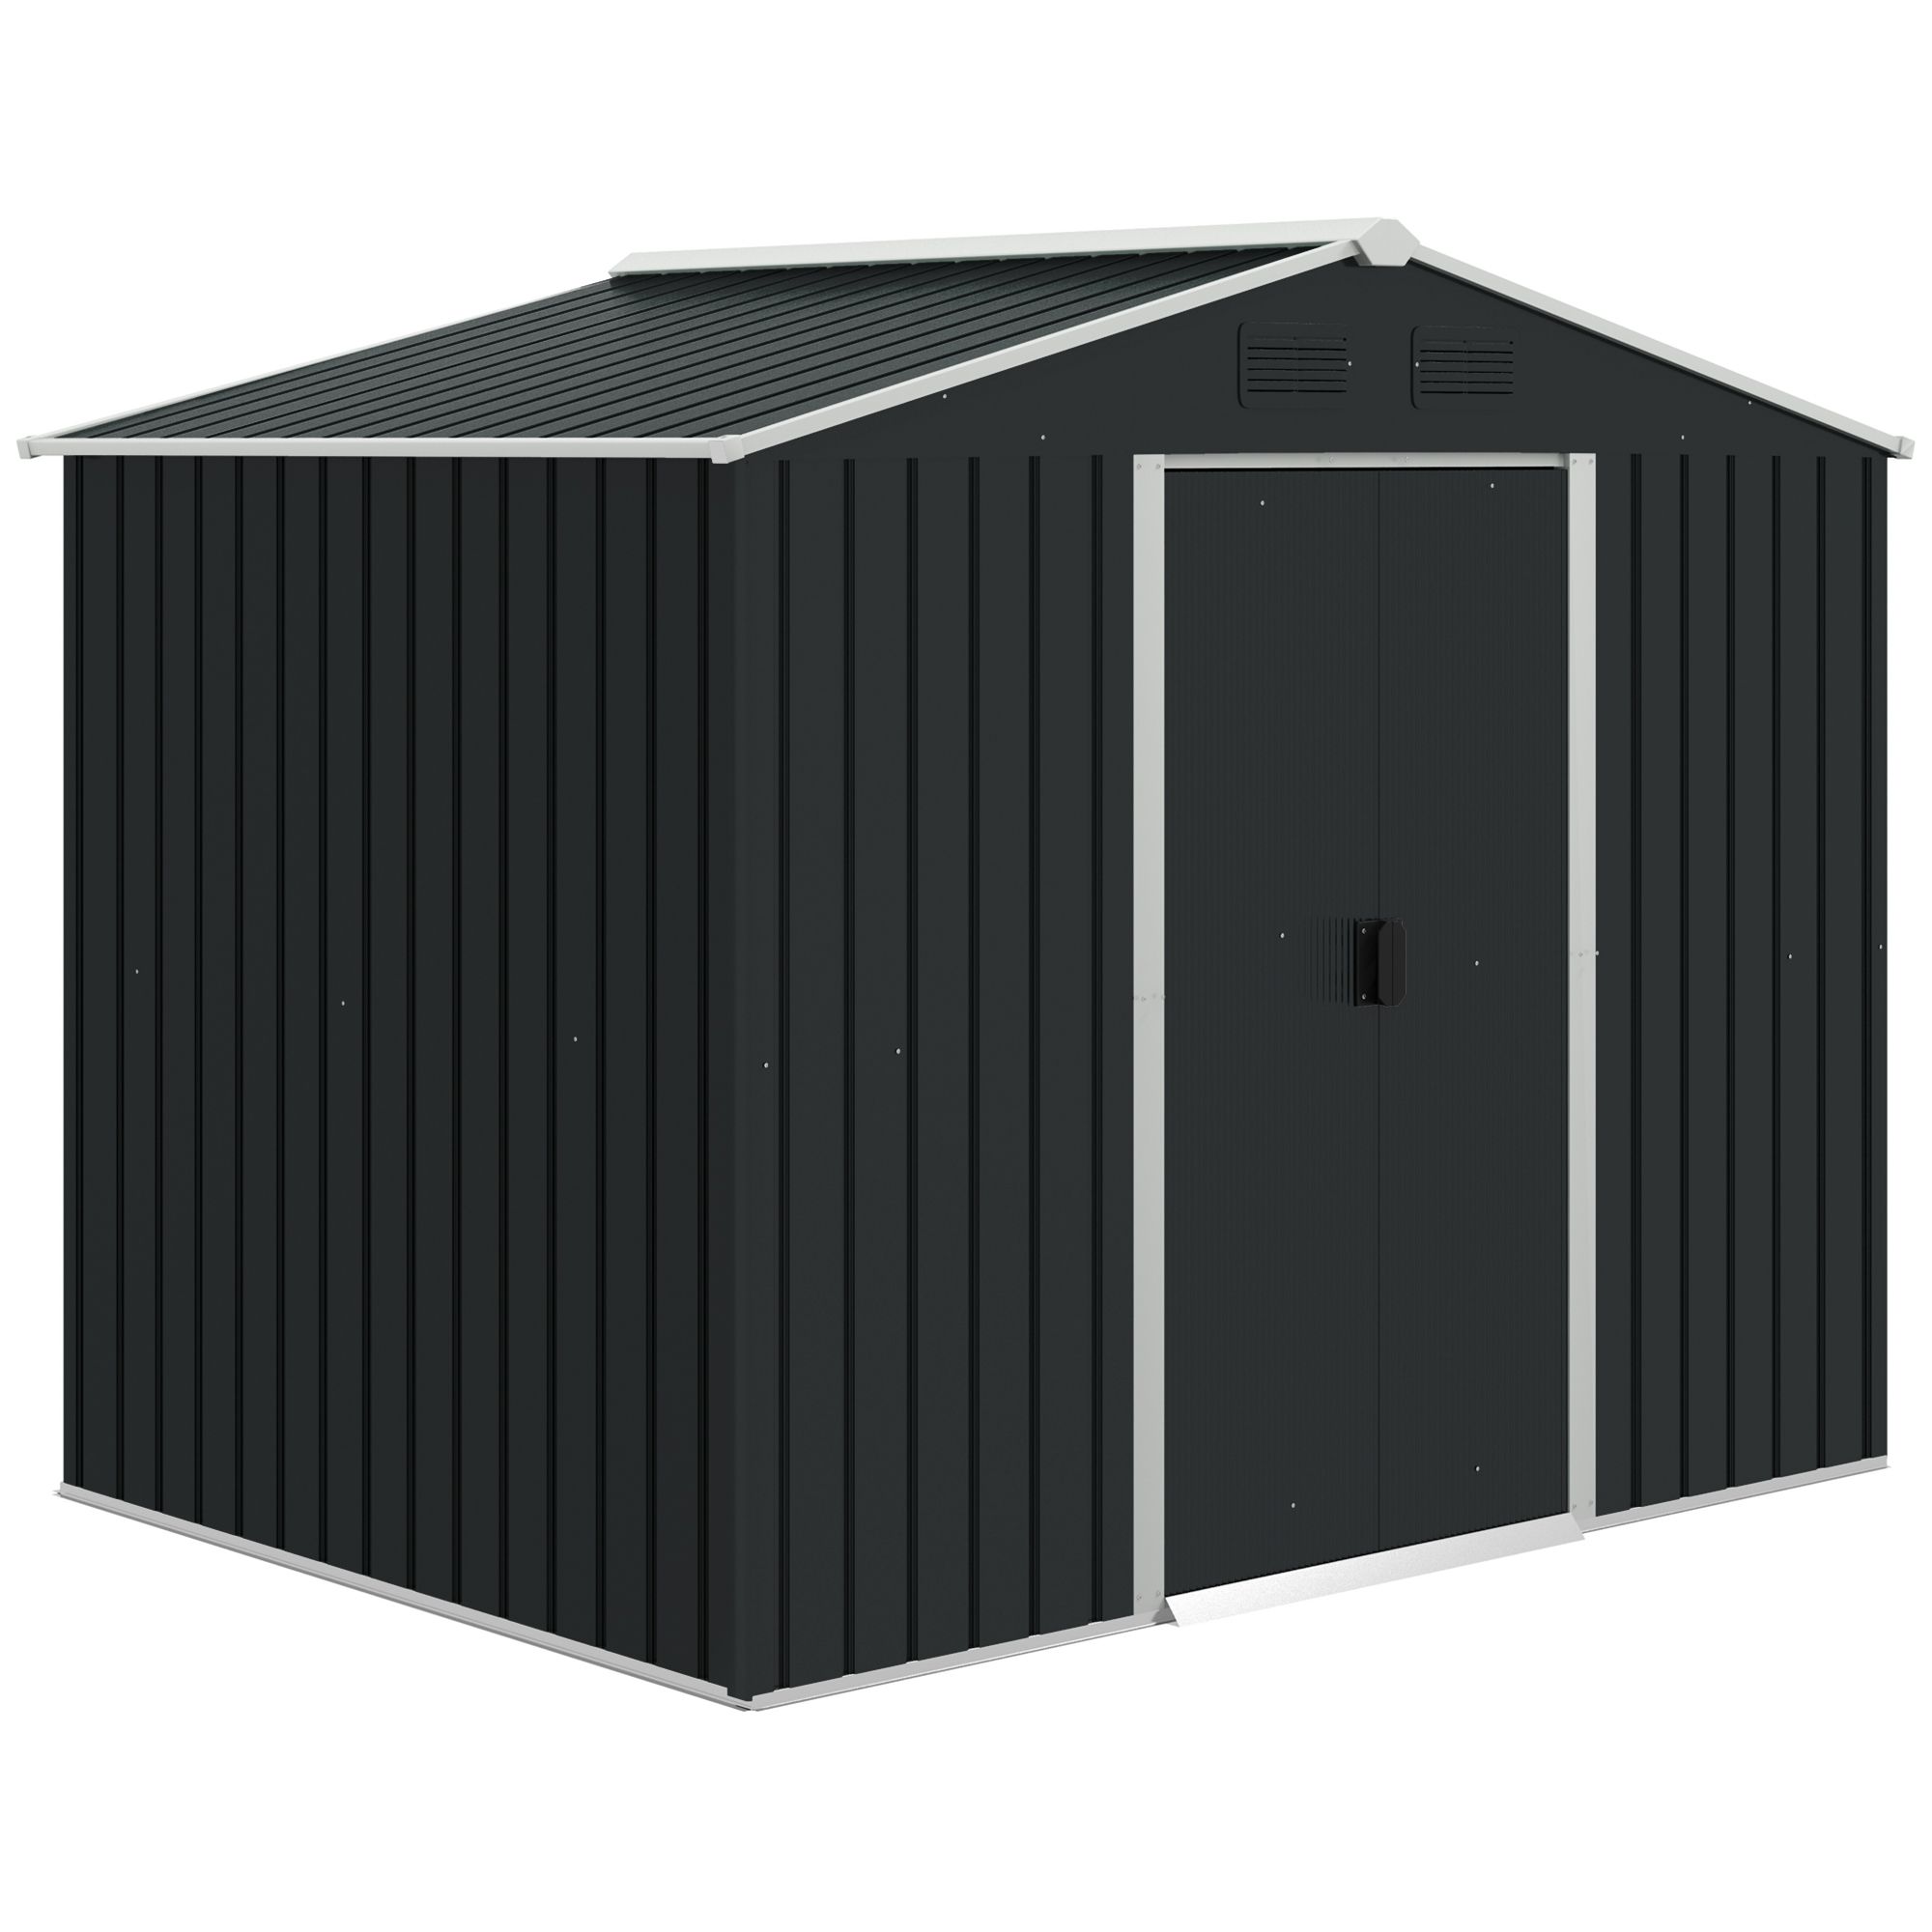 Outsunny 8 X 6ft Garden Storage Shed Double Door Ventilation Windows Sloped Roof Outdoor Equipment Tool, Grey